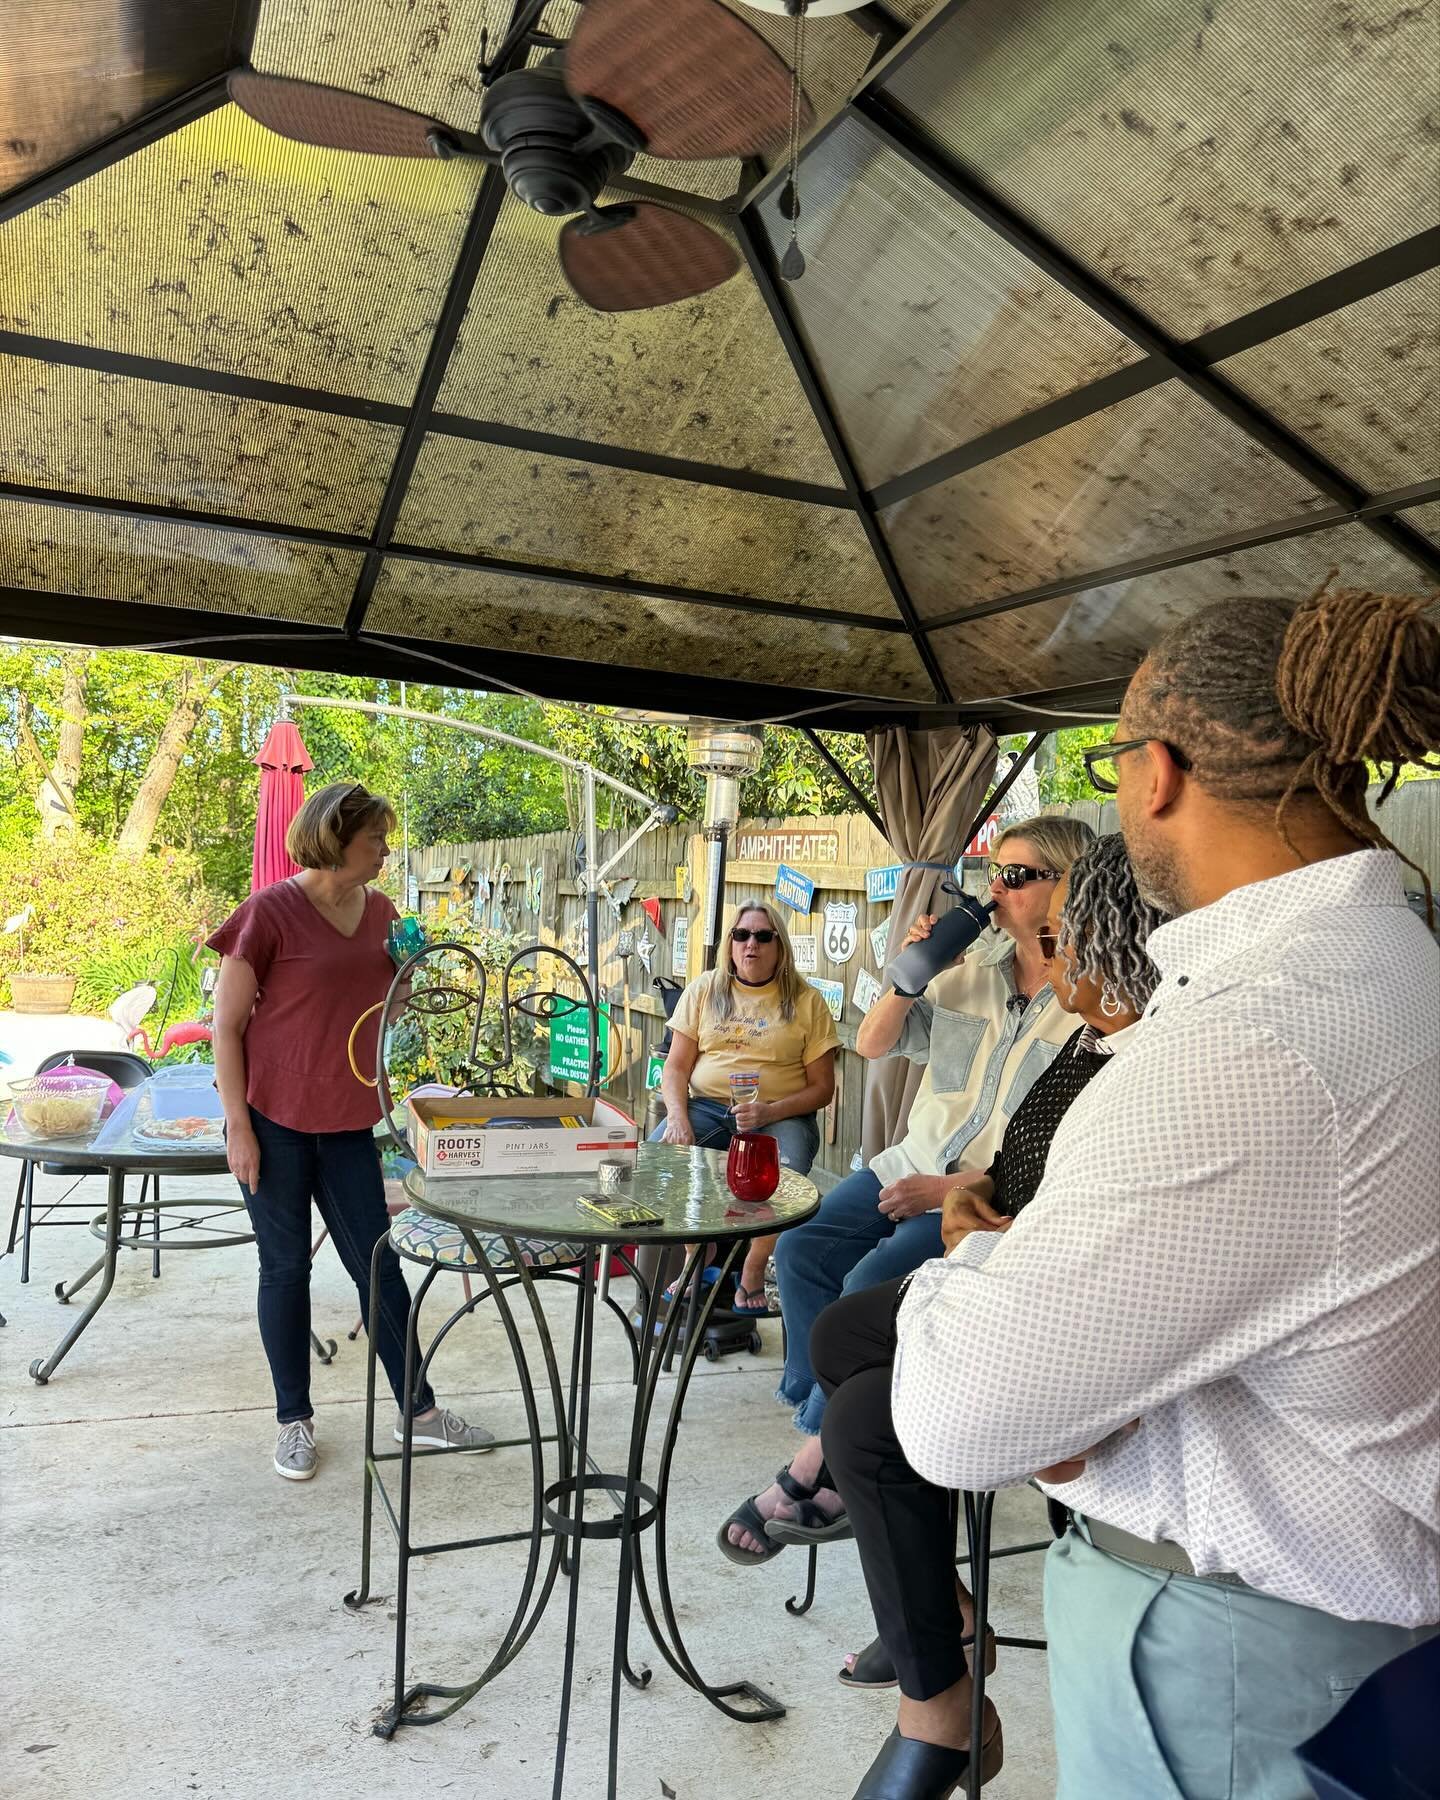 Yesterday I had the privilege of talking with people in my community about my campaign and my &ldquo;Why&rdquo;. I am grateful for those who came out to talk to me about what they would like to see in our community and to want to get to know @borcear